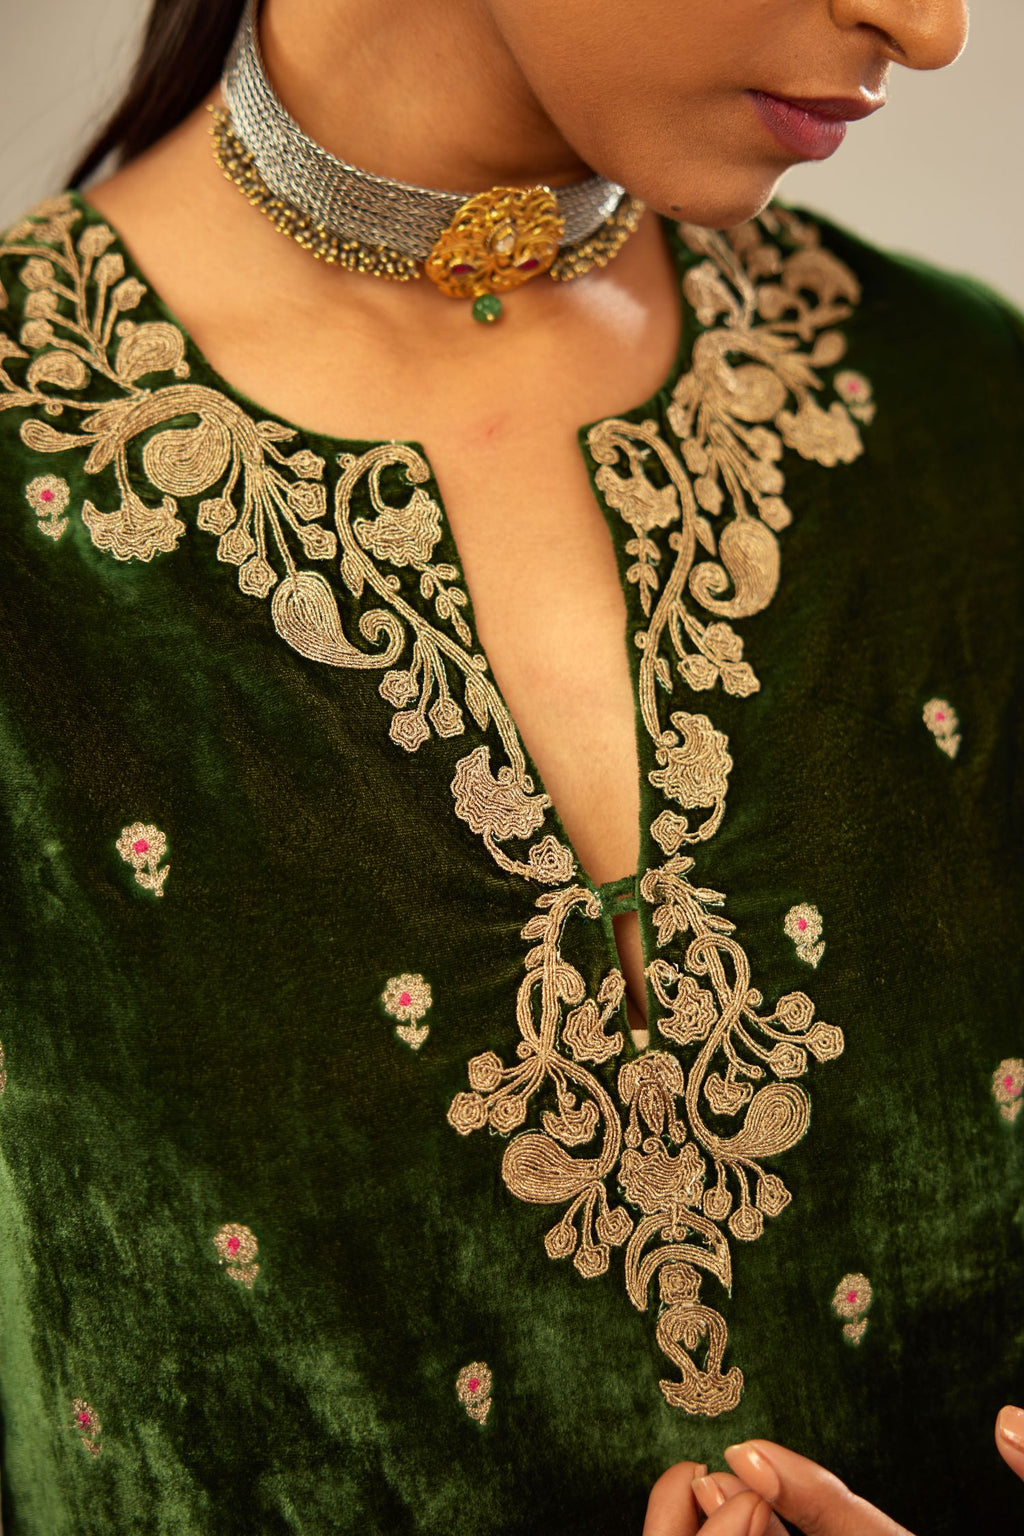 Green silk velvet kurta set with small embroidered zari buties all-over the kurta and detailed with dori embroidery at neck, sleeves, side slits and hem.